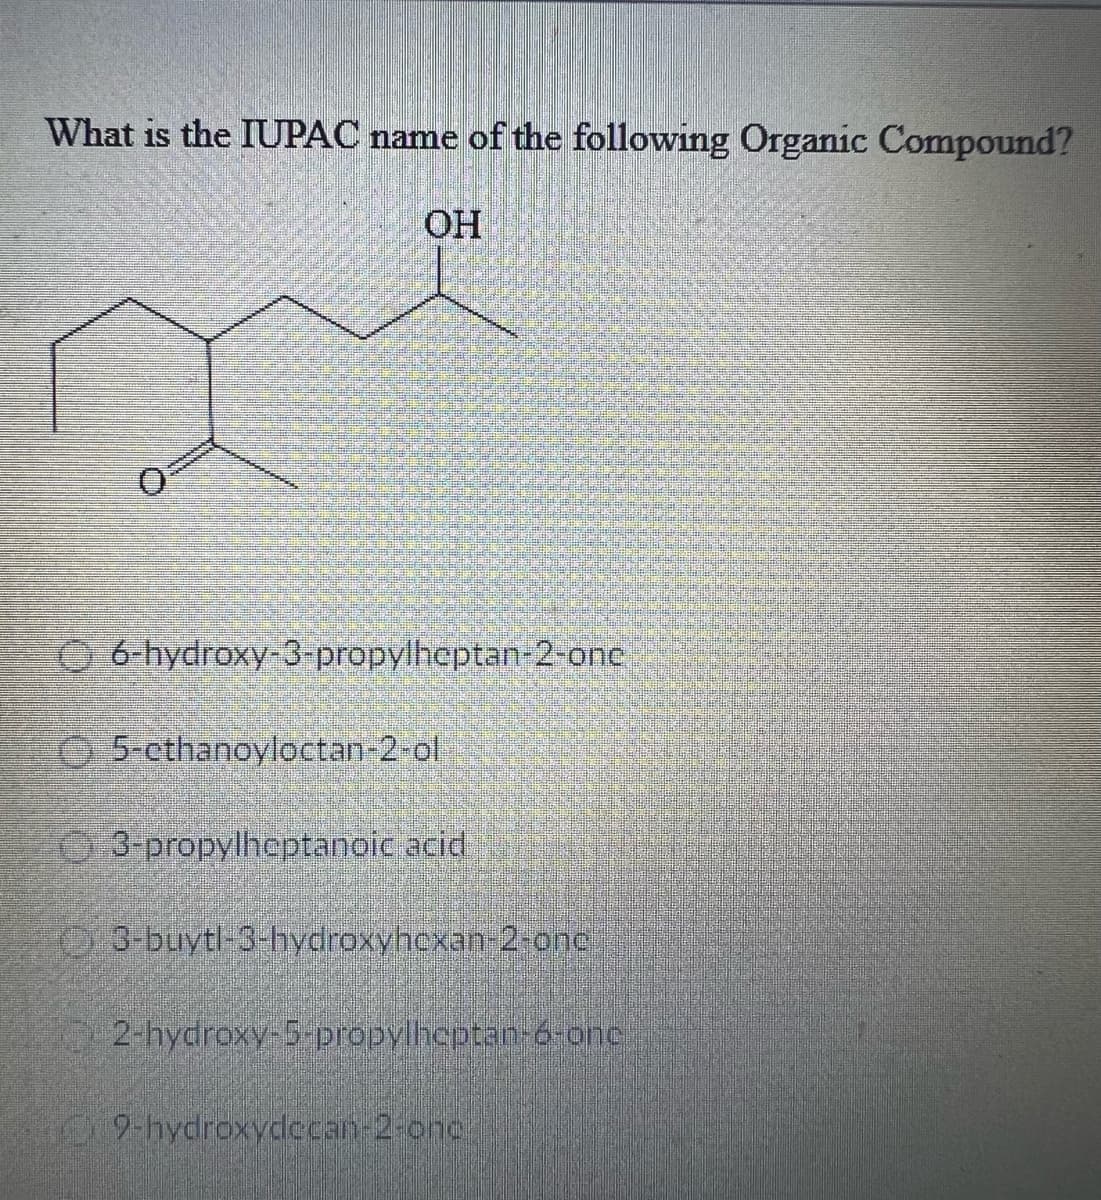 What is the IUPAC name of the following Organic Compound?
OH
Ⓒ6-hydroxy-3-propylheptan-2-onc
5-cthanoyloctan-2-ol
3-propylheptanoic acid
03-buytl-3-hydroxyhexan-2-onc
2-hydroxy-5-propylheptan-6-one
9-hydroxydecan-2-onc